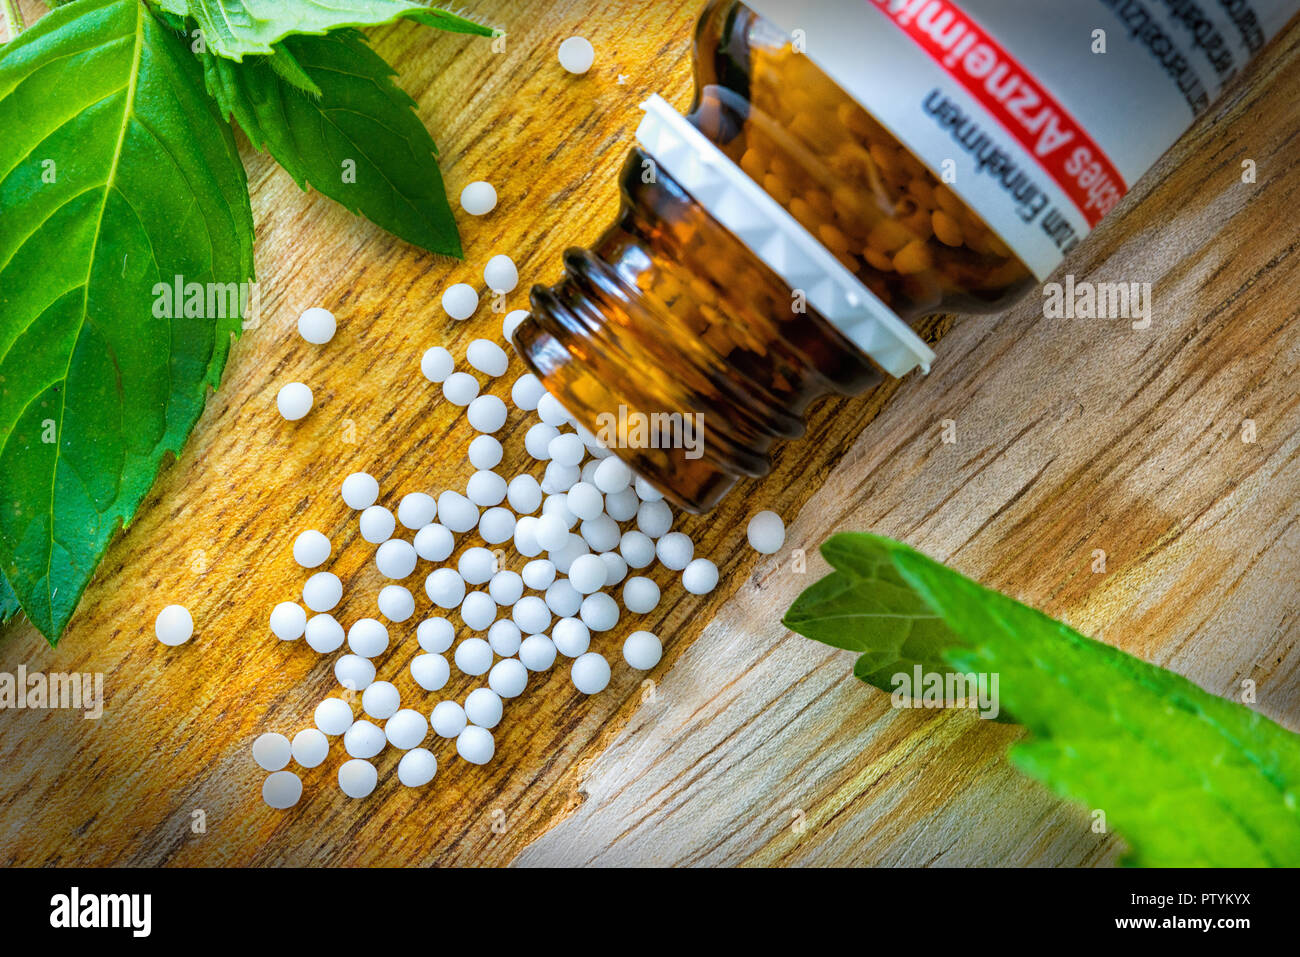 Globoli on wooden table with brown bottle and green leaves Stock Photo